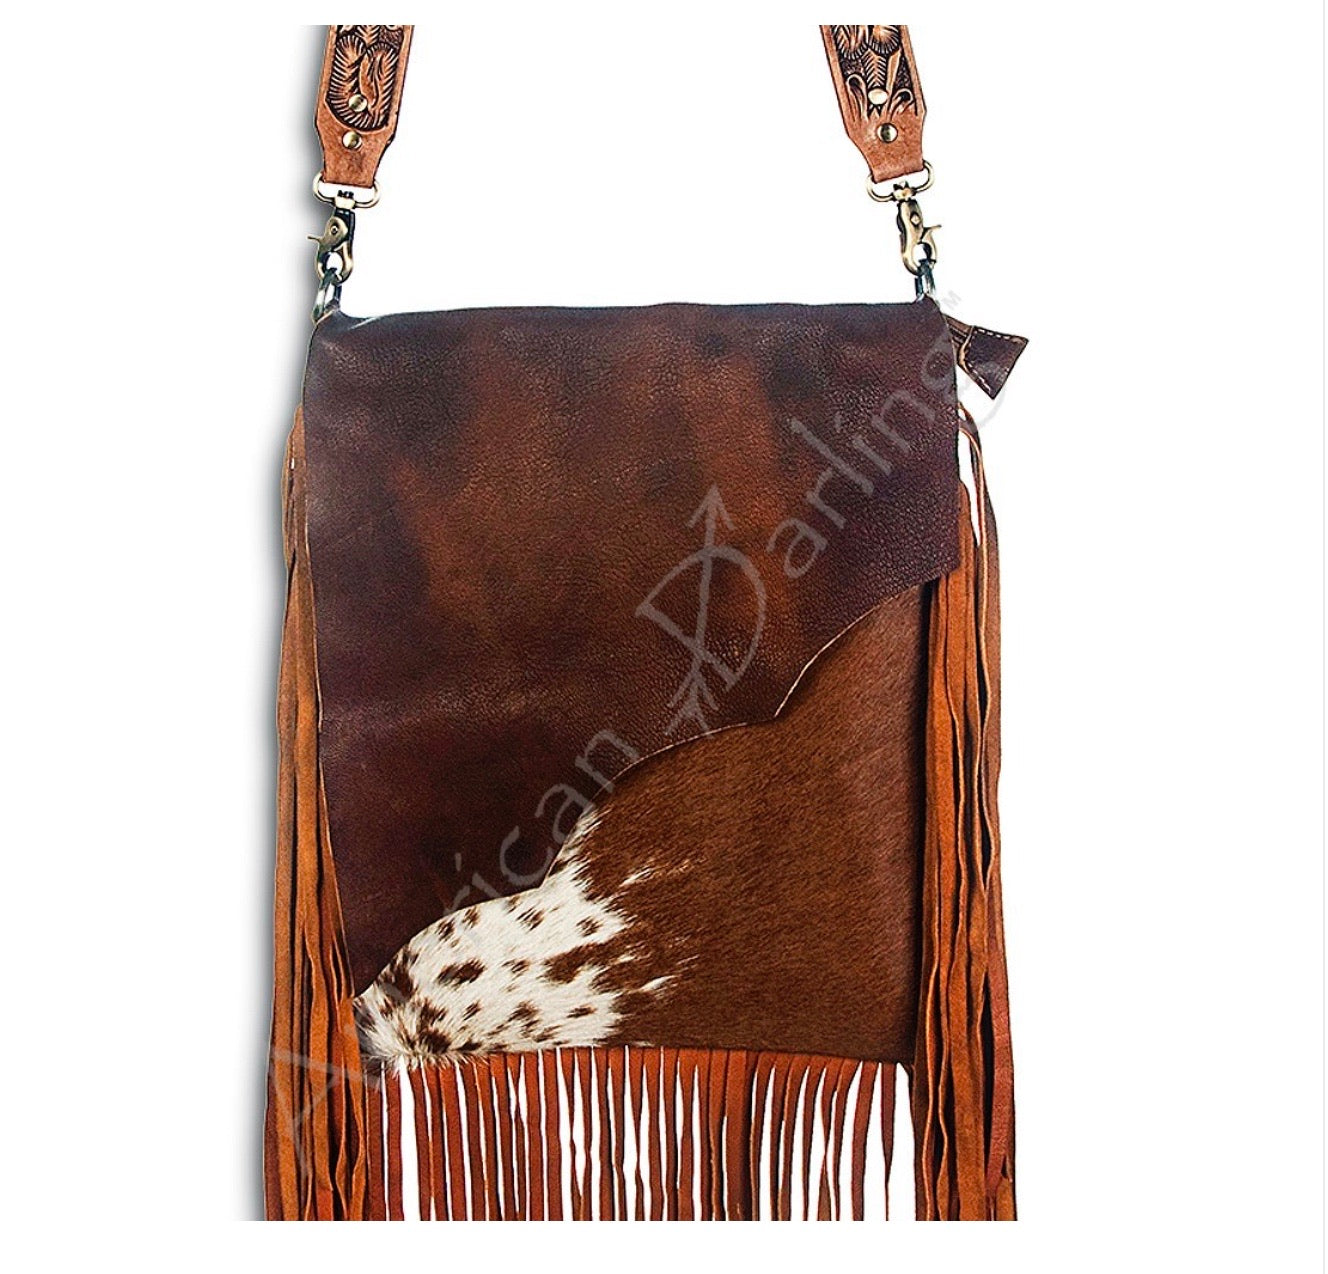 Purse with real leather fringe and tooled leather strap ADBGZ137TAW